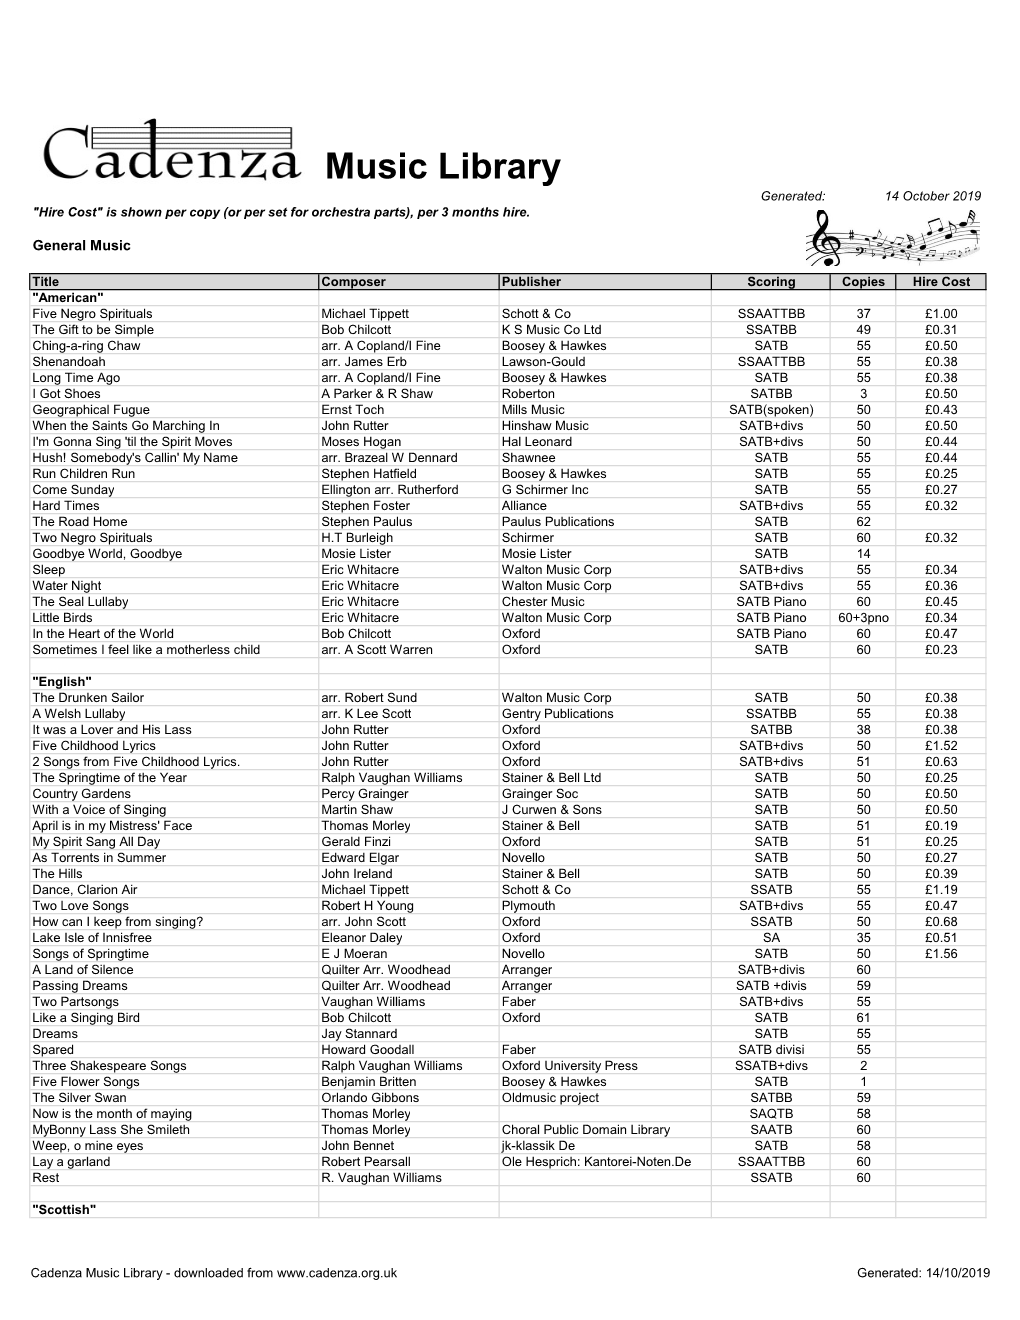 View Cadenza's Library List